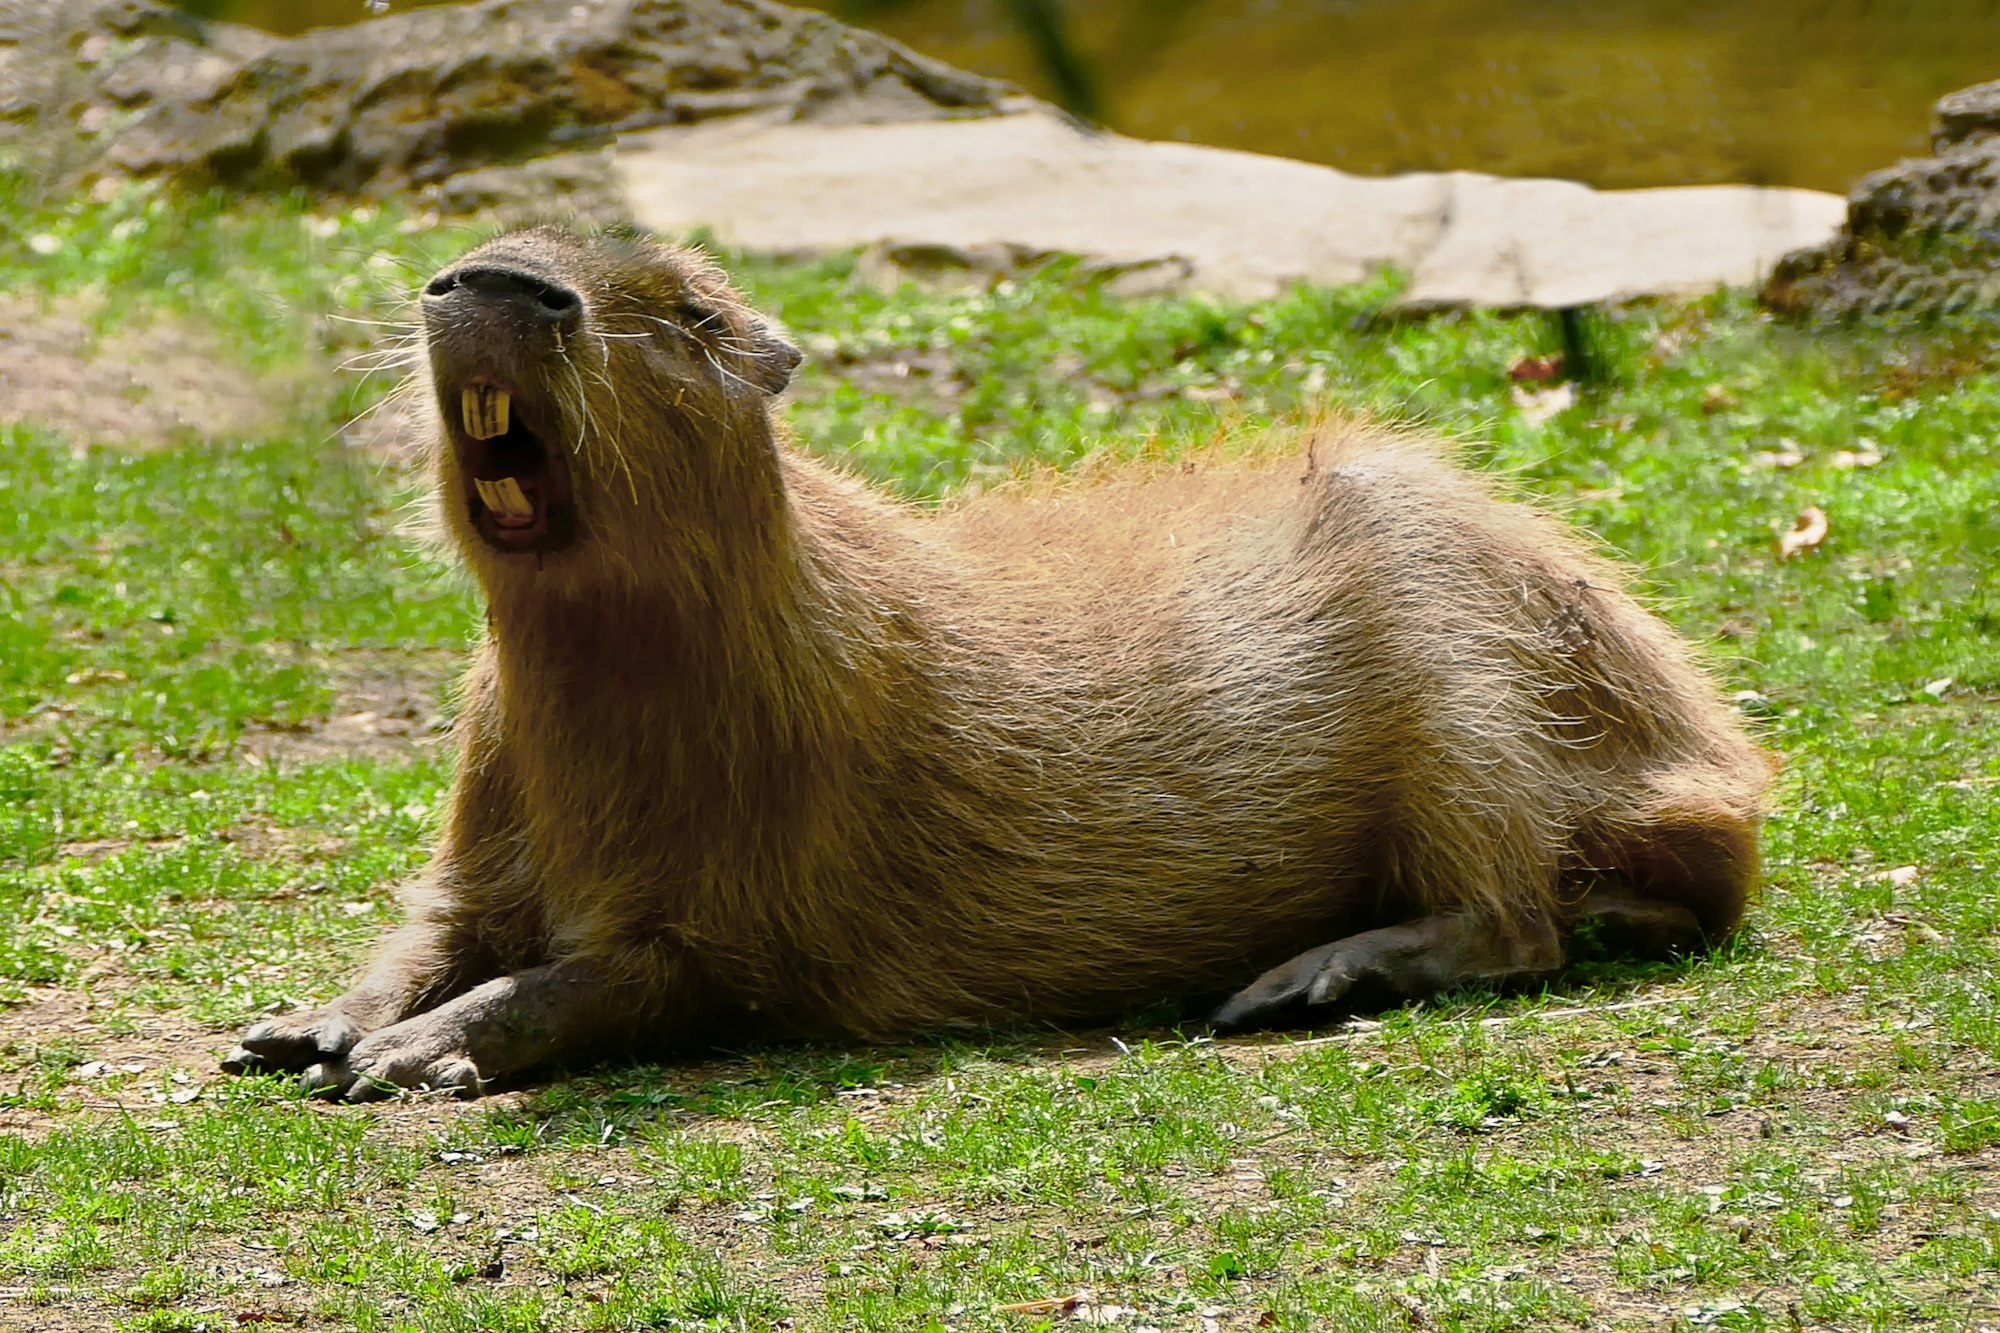 A brown capybara with a wide open mouth sitting in the grass